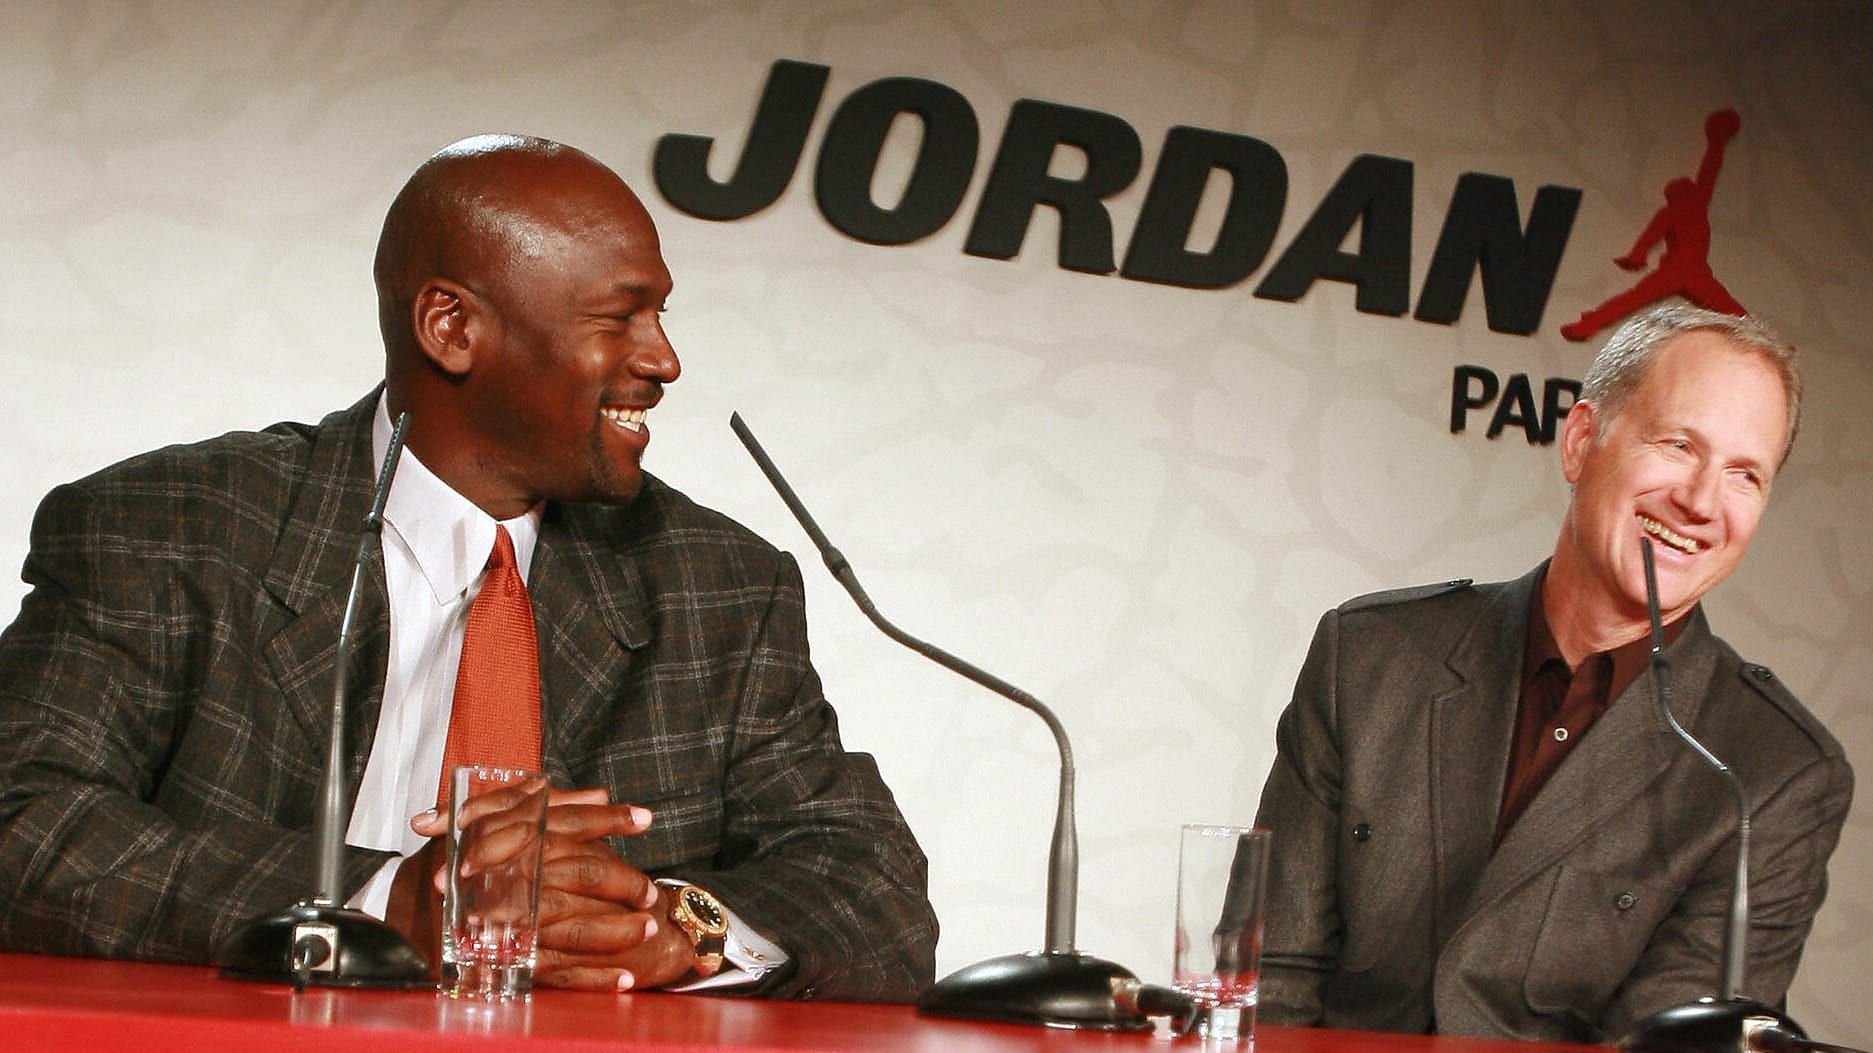 Michael Jordan and Tinker Hatfield changed sneaker history forever. [Photo: Complex]